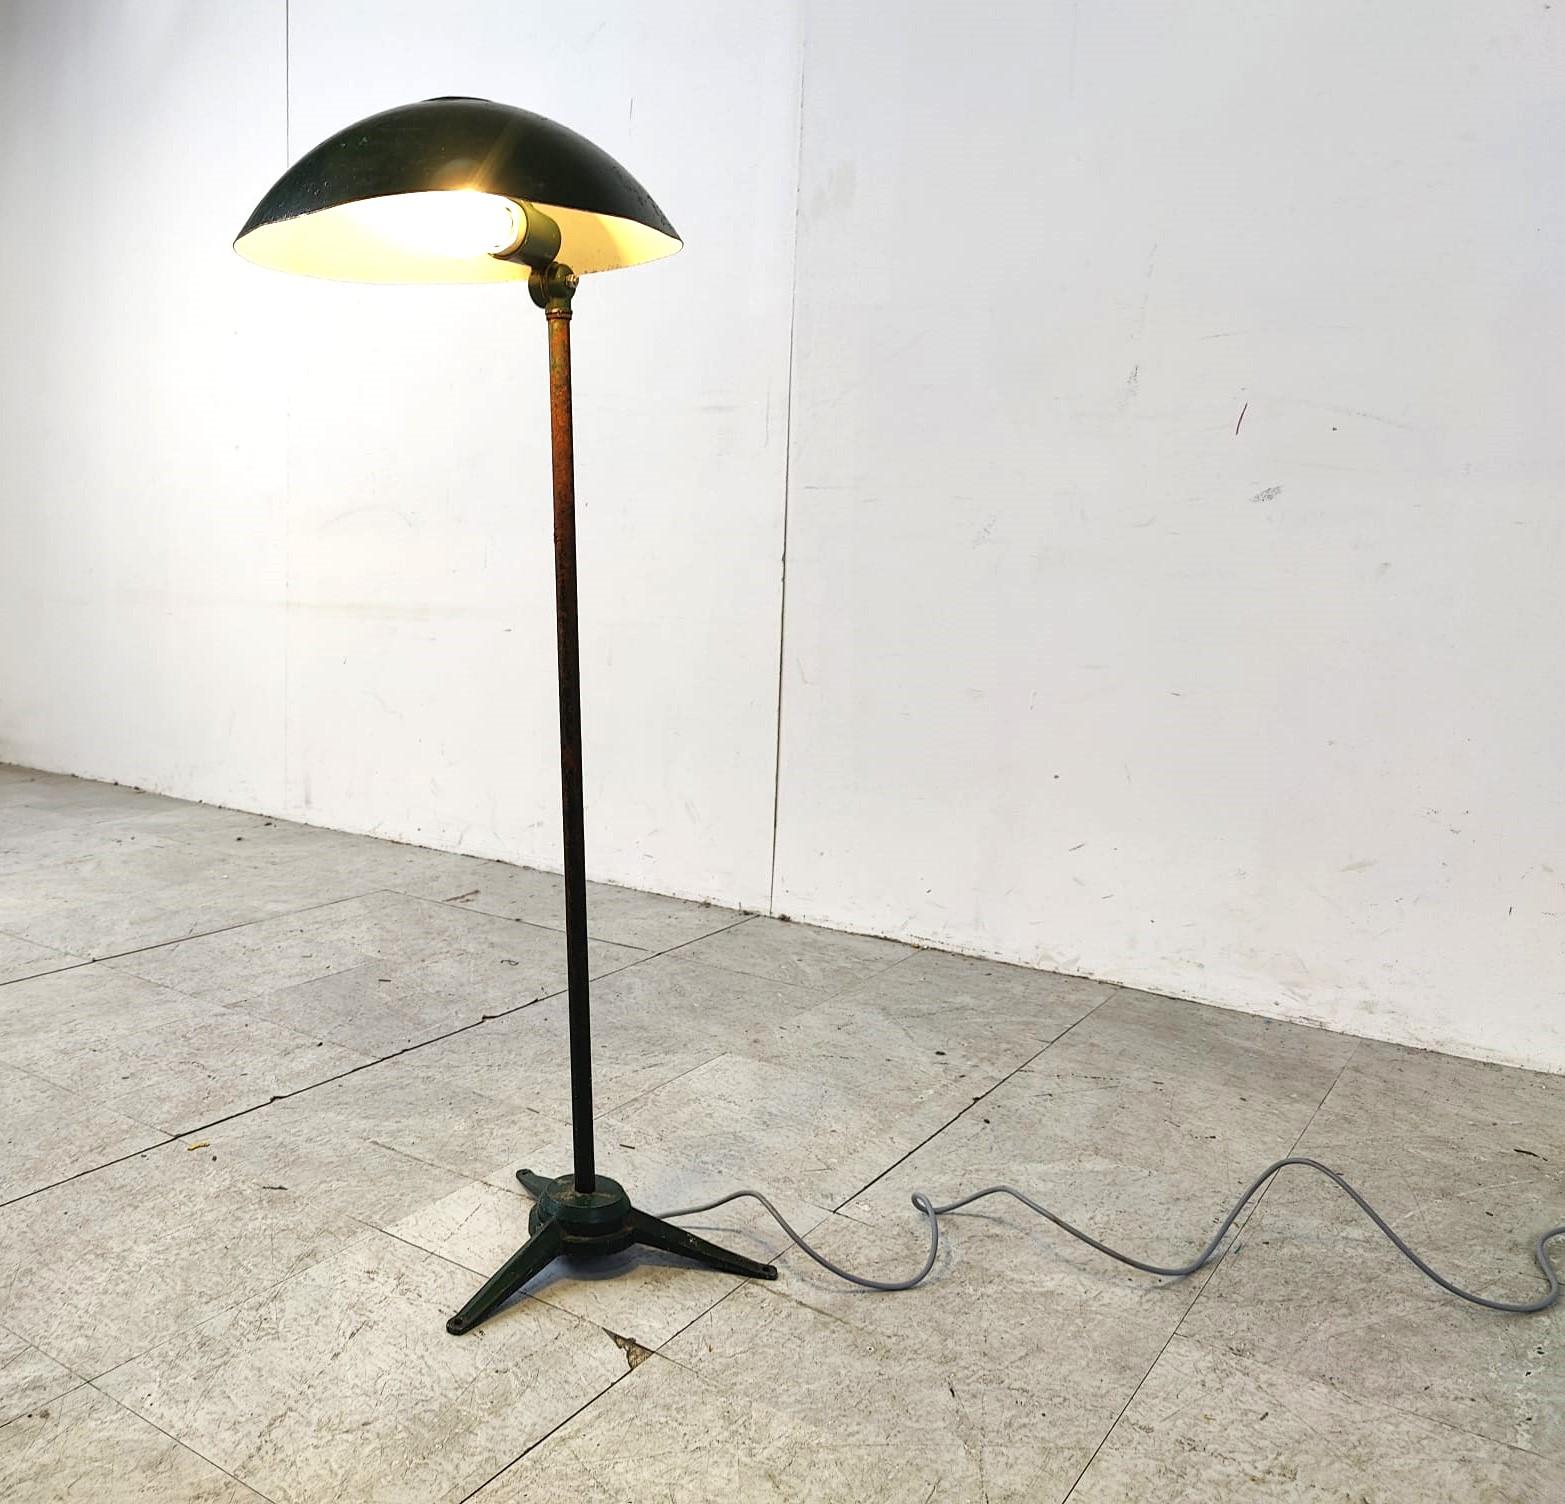 Vintage floor lamp made from dark green metal.

It has a nicely shaped shade and a tripod base.

It can be used in and outdoor.

Beautiful patina.

Tested and ready to use.

1970s - Belgium

Dimensions:
Height: 95cm
Width: 35cm
Depth: 35cm

Ref: